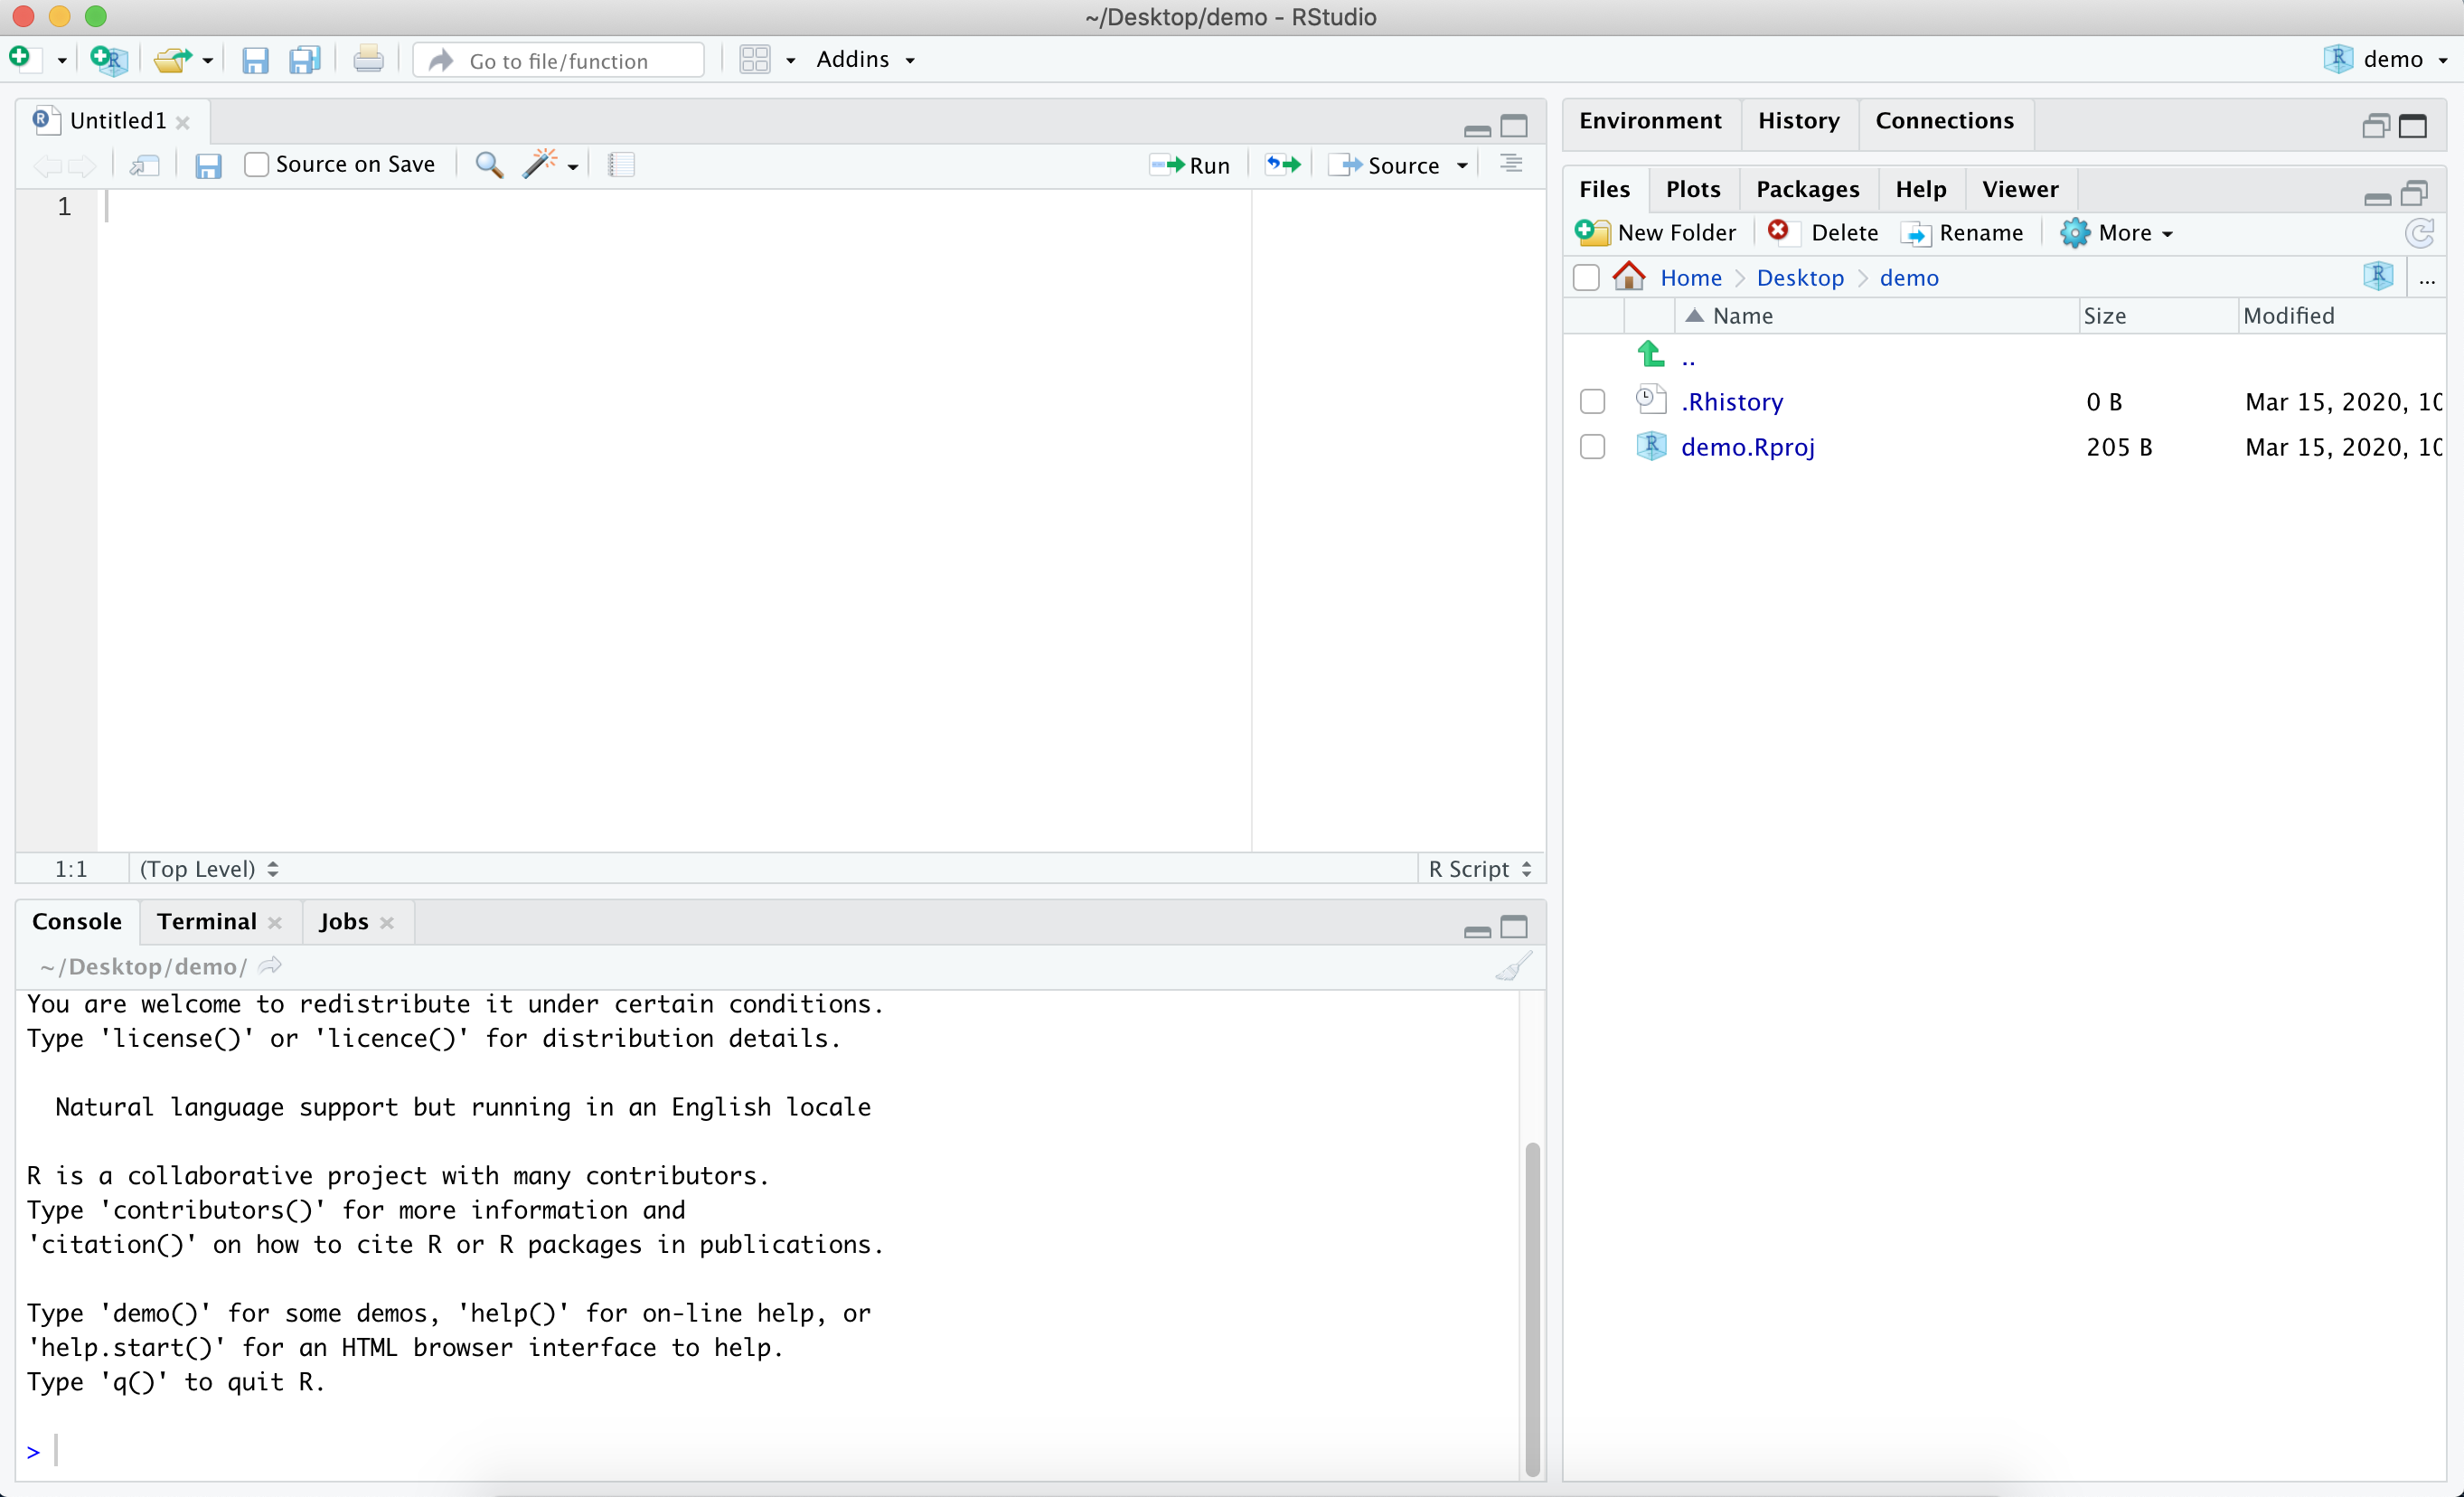 RStudio Layout with the Environment Pane Minimized